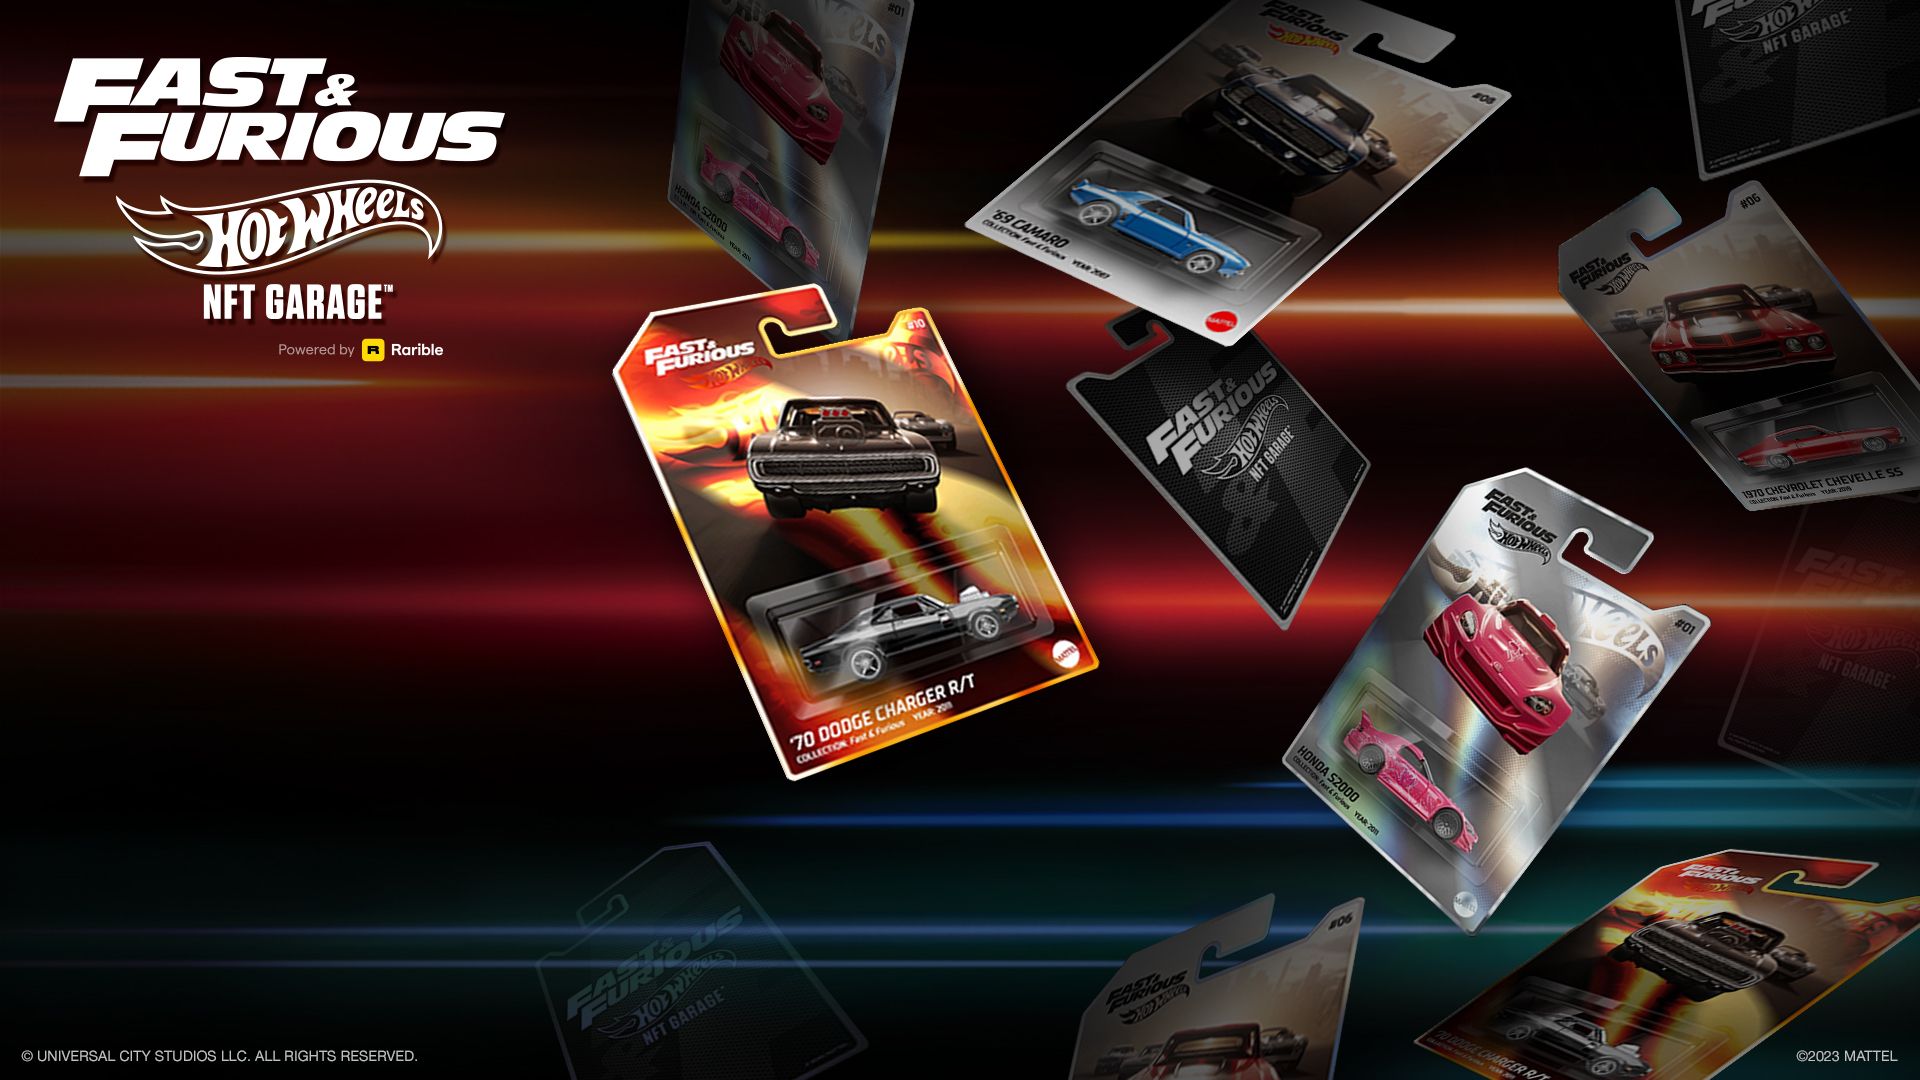 Ready to get Fast & Furious? Mattel’s latest NFT drop is live